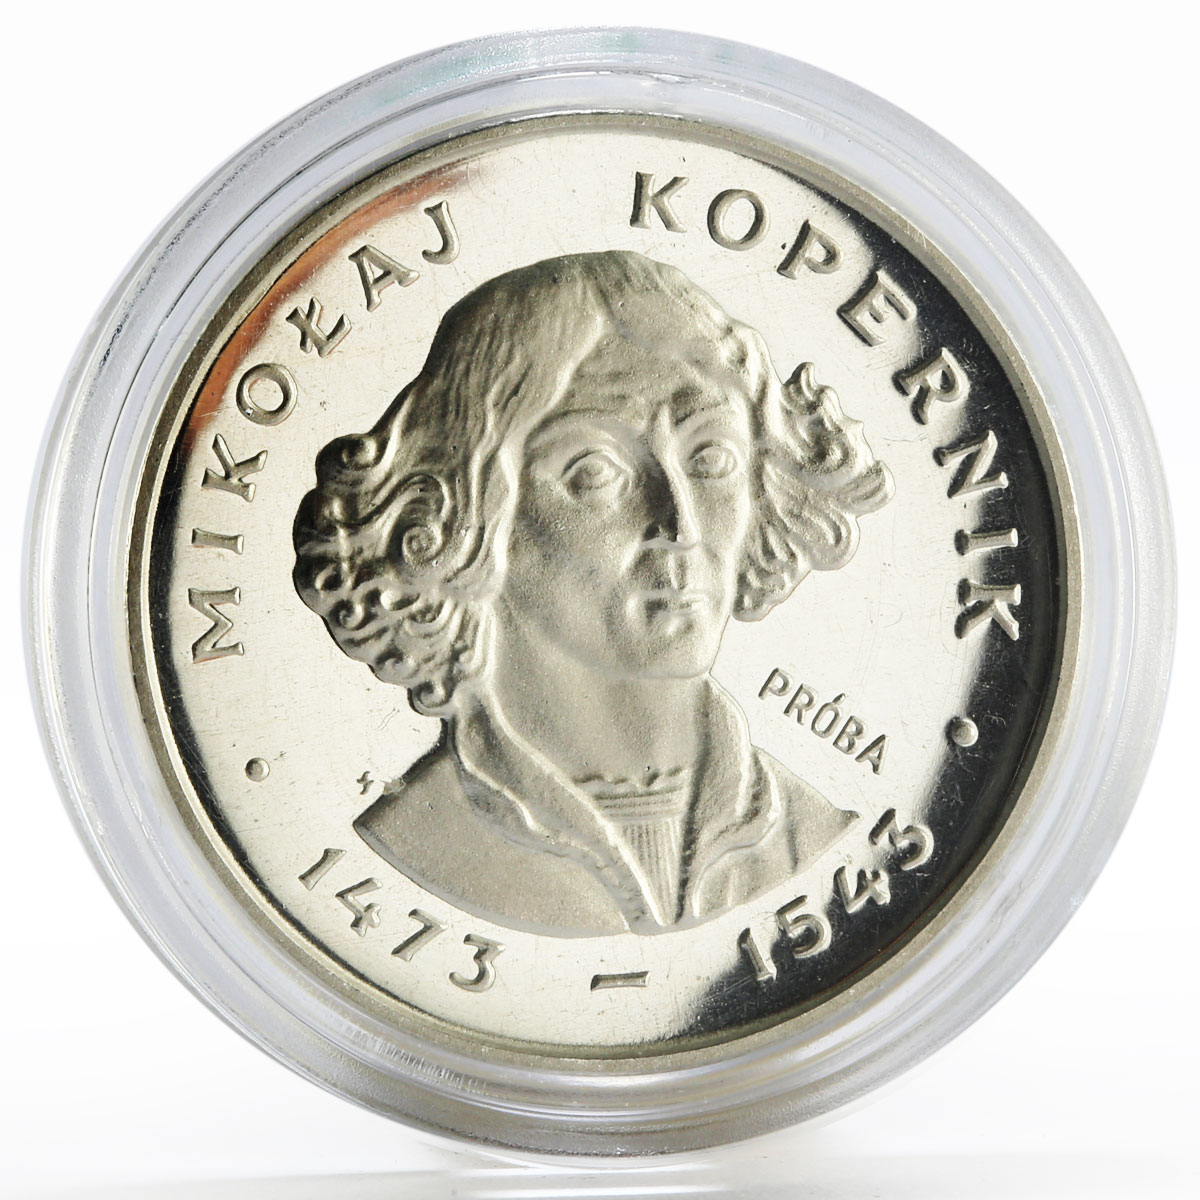 Poland 100 zlotych Nicolaus Copernicus the Famous Astronomer silver coin 1973